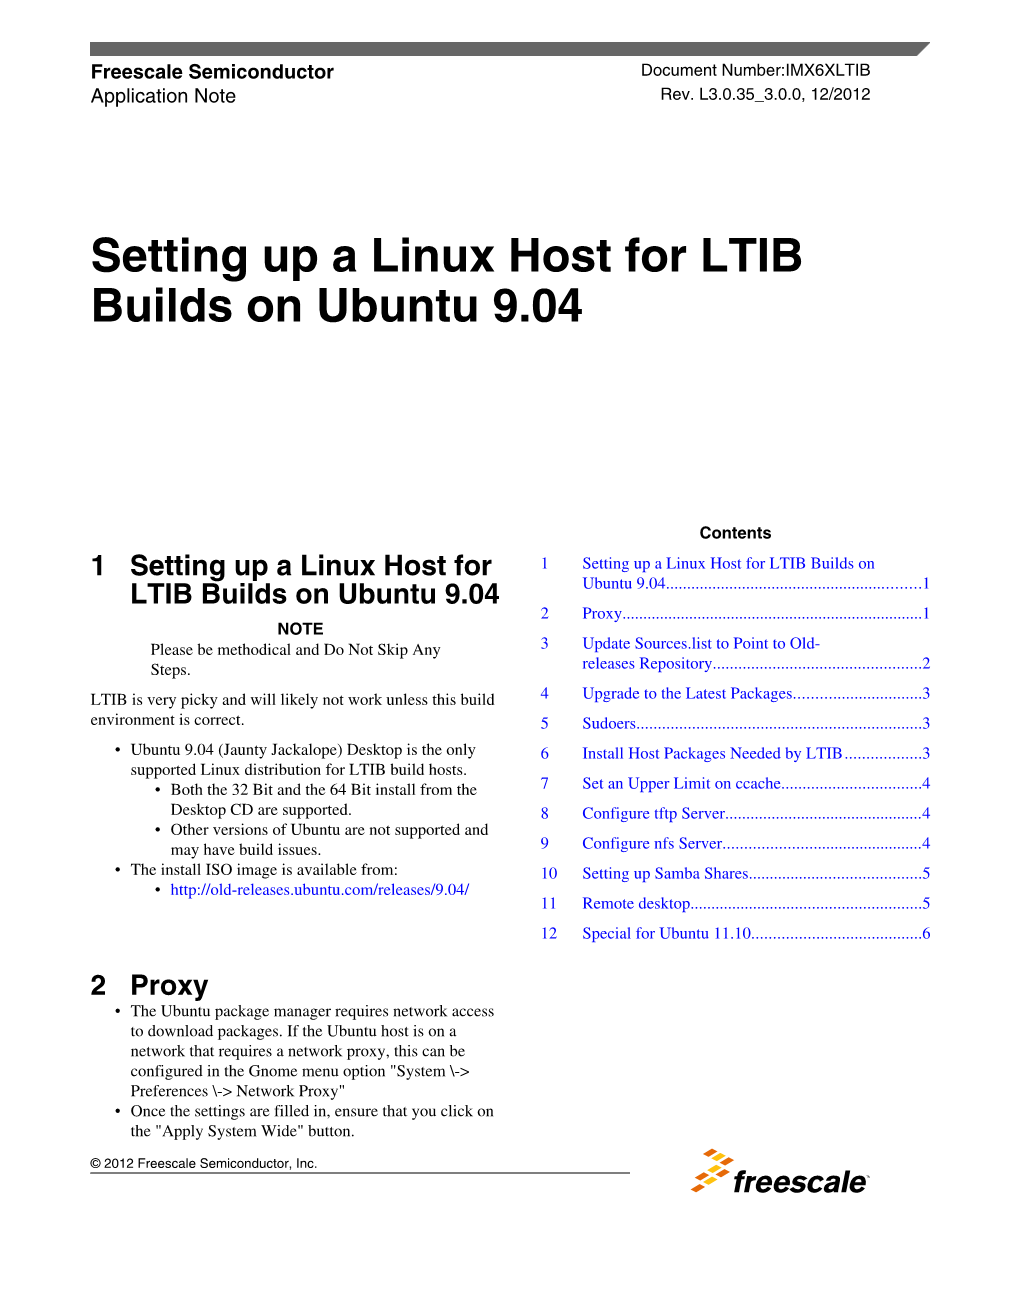 Setting up a Linux Host for LTIB Builds on Ubuntu 9.04